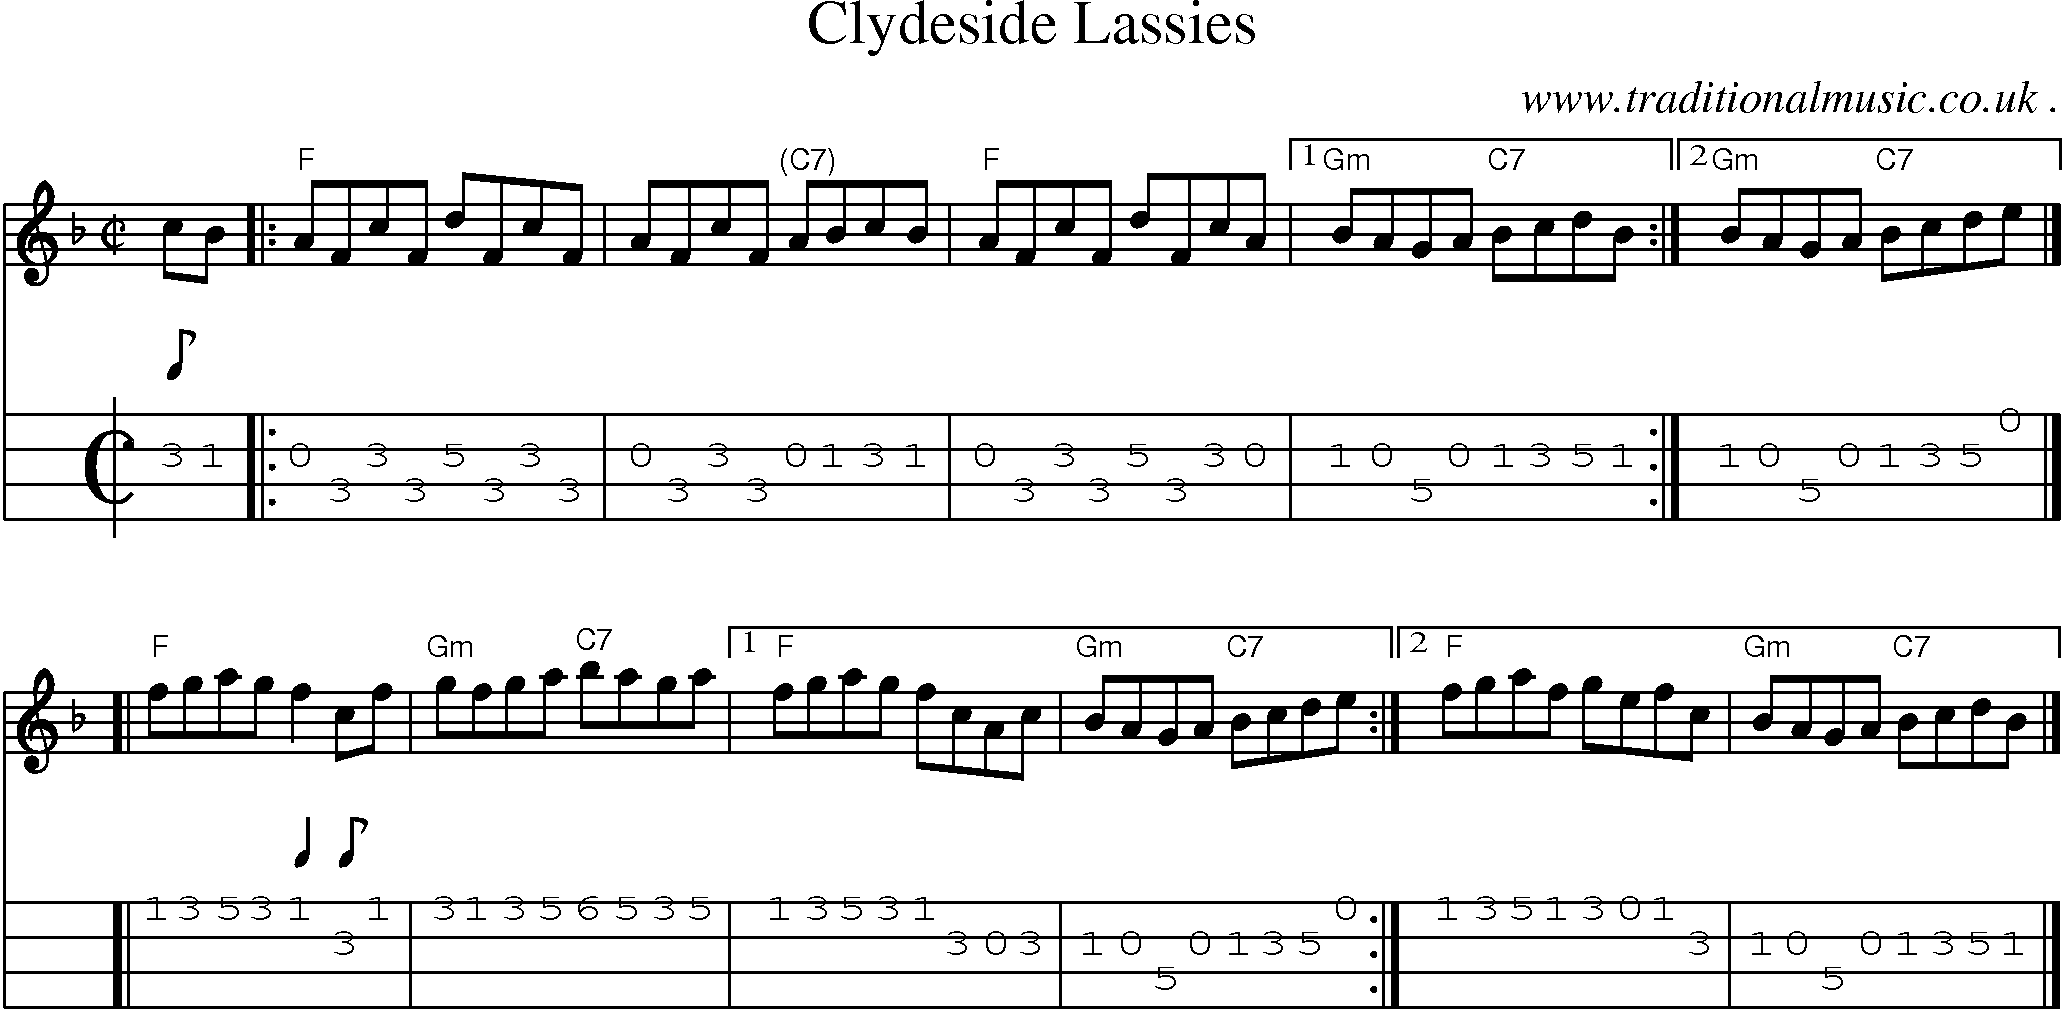 Sheet-music  score, Chords and Mandolin Tabs for Clydeside Lassies